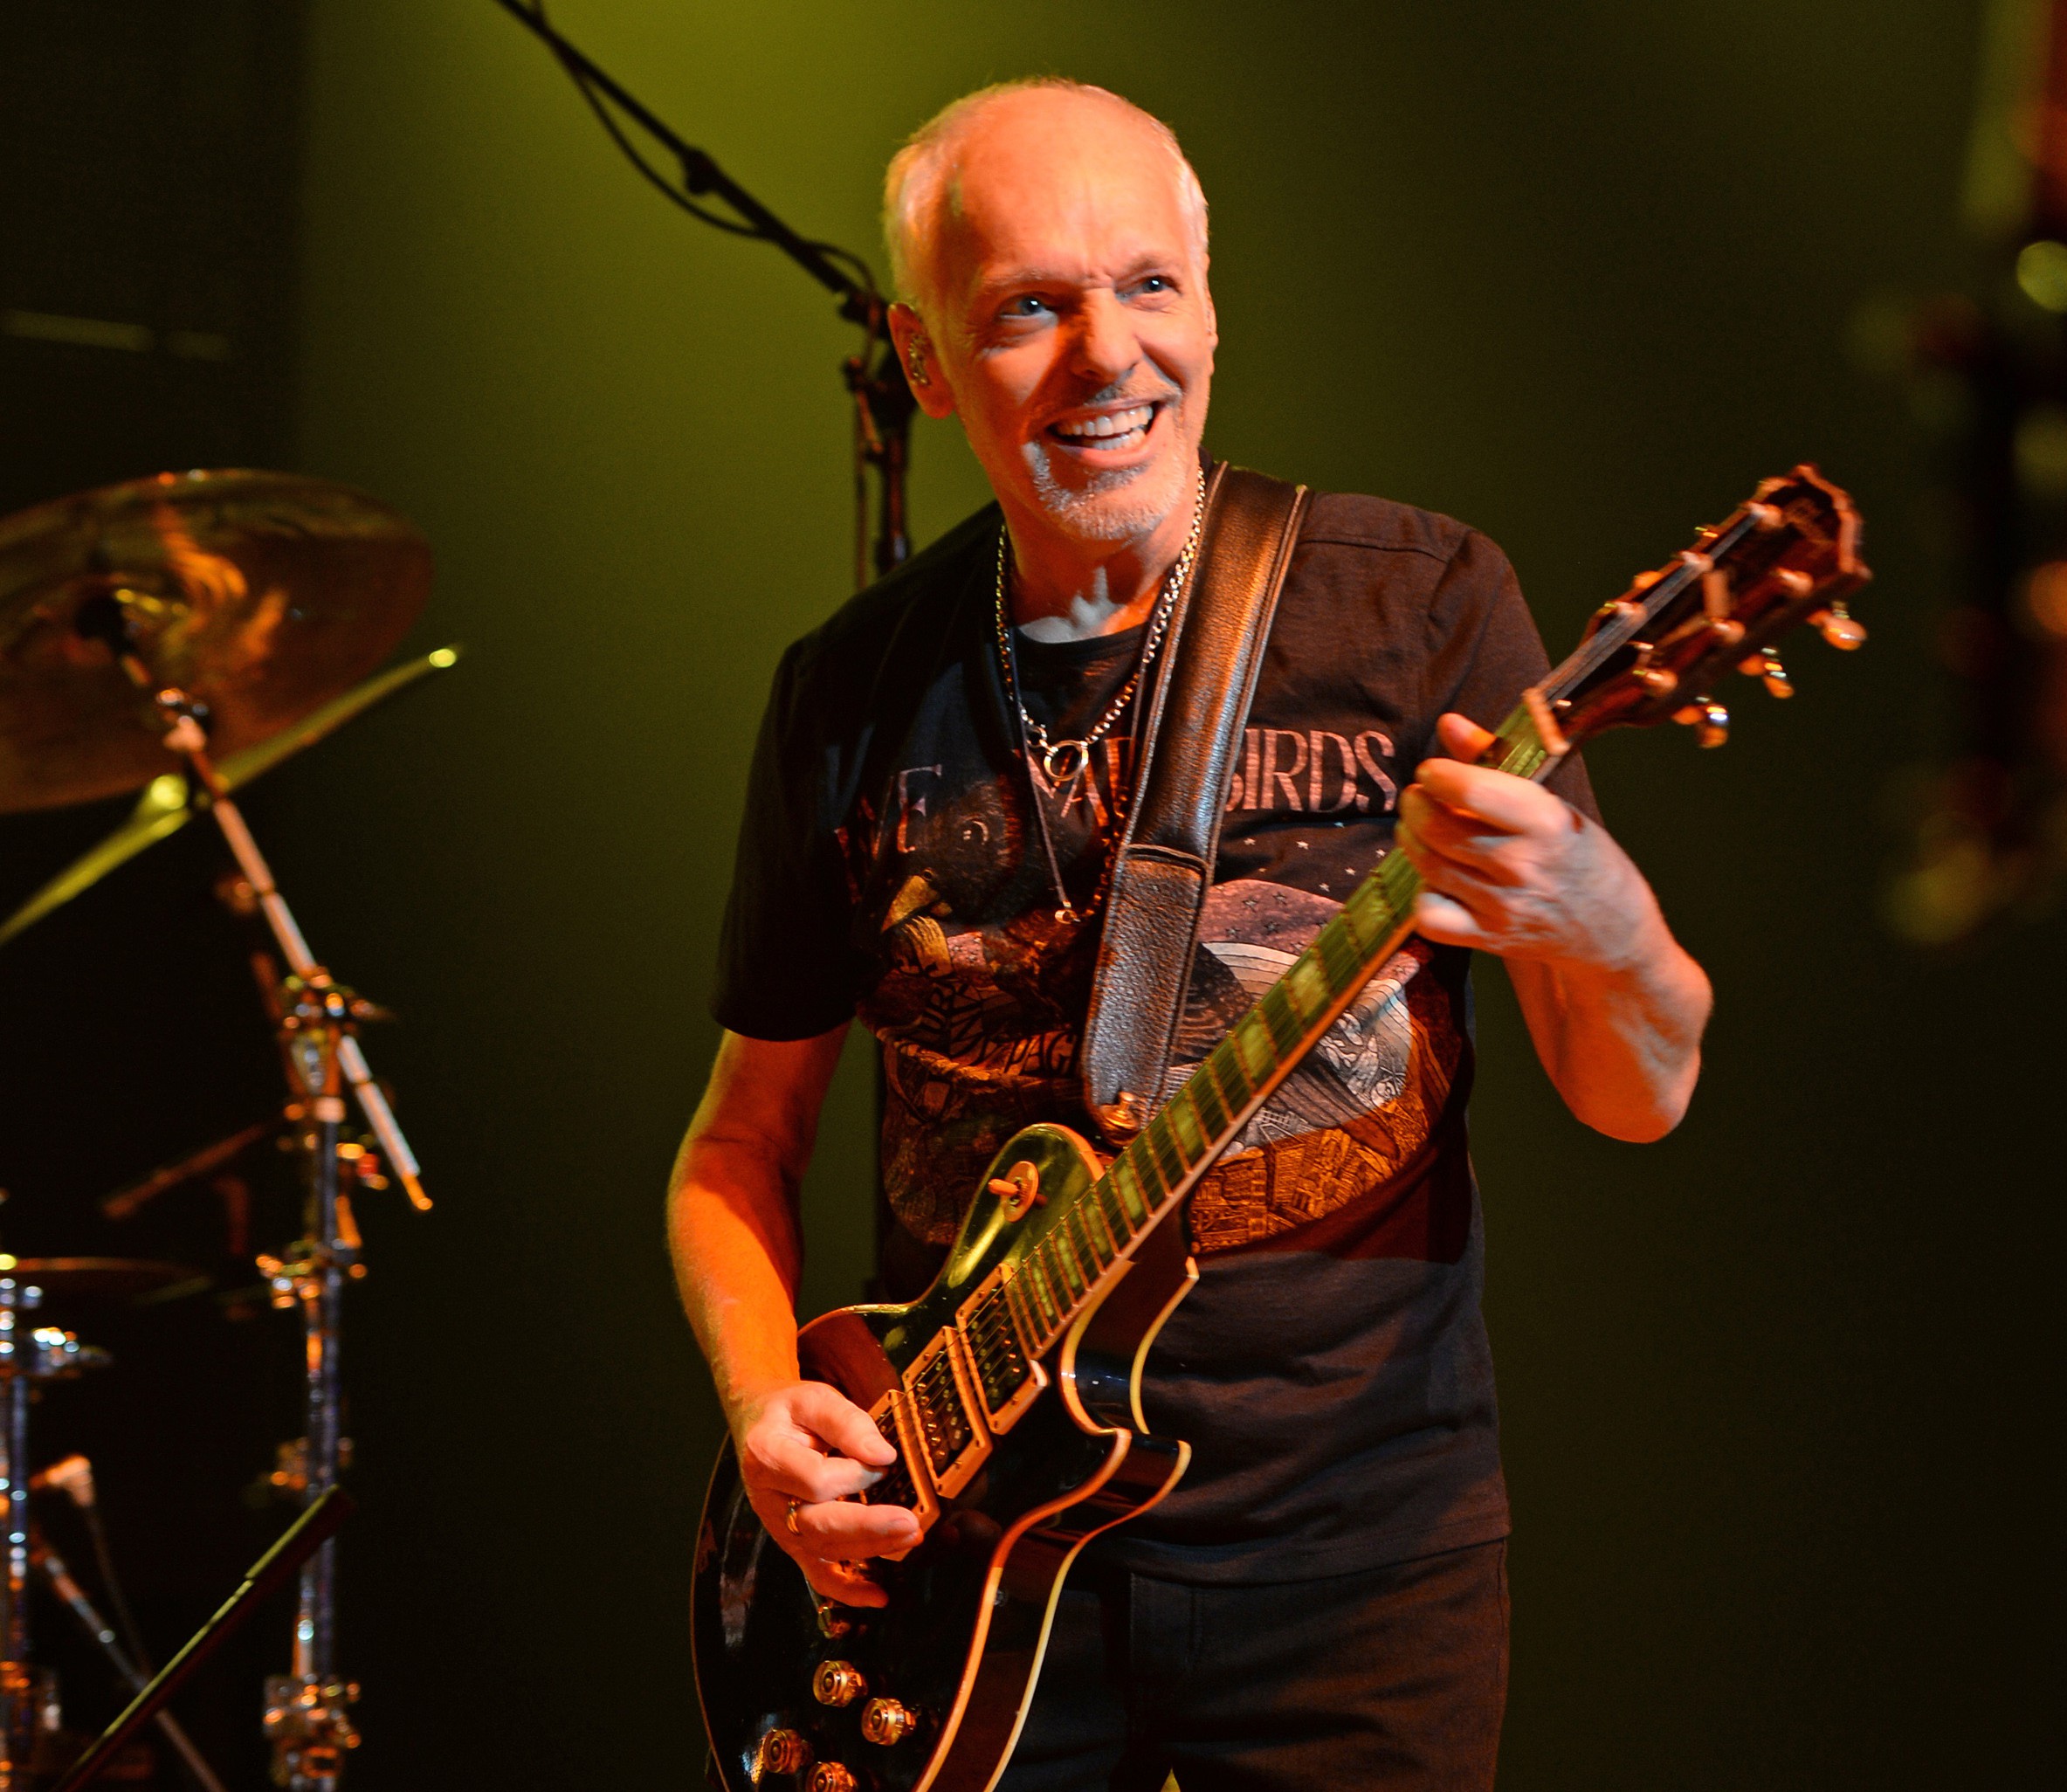 Peter Frampton performs on the Grandstand stage at the San Diego County Fair June 10. Photo by Larry Marano, Getty Images